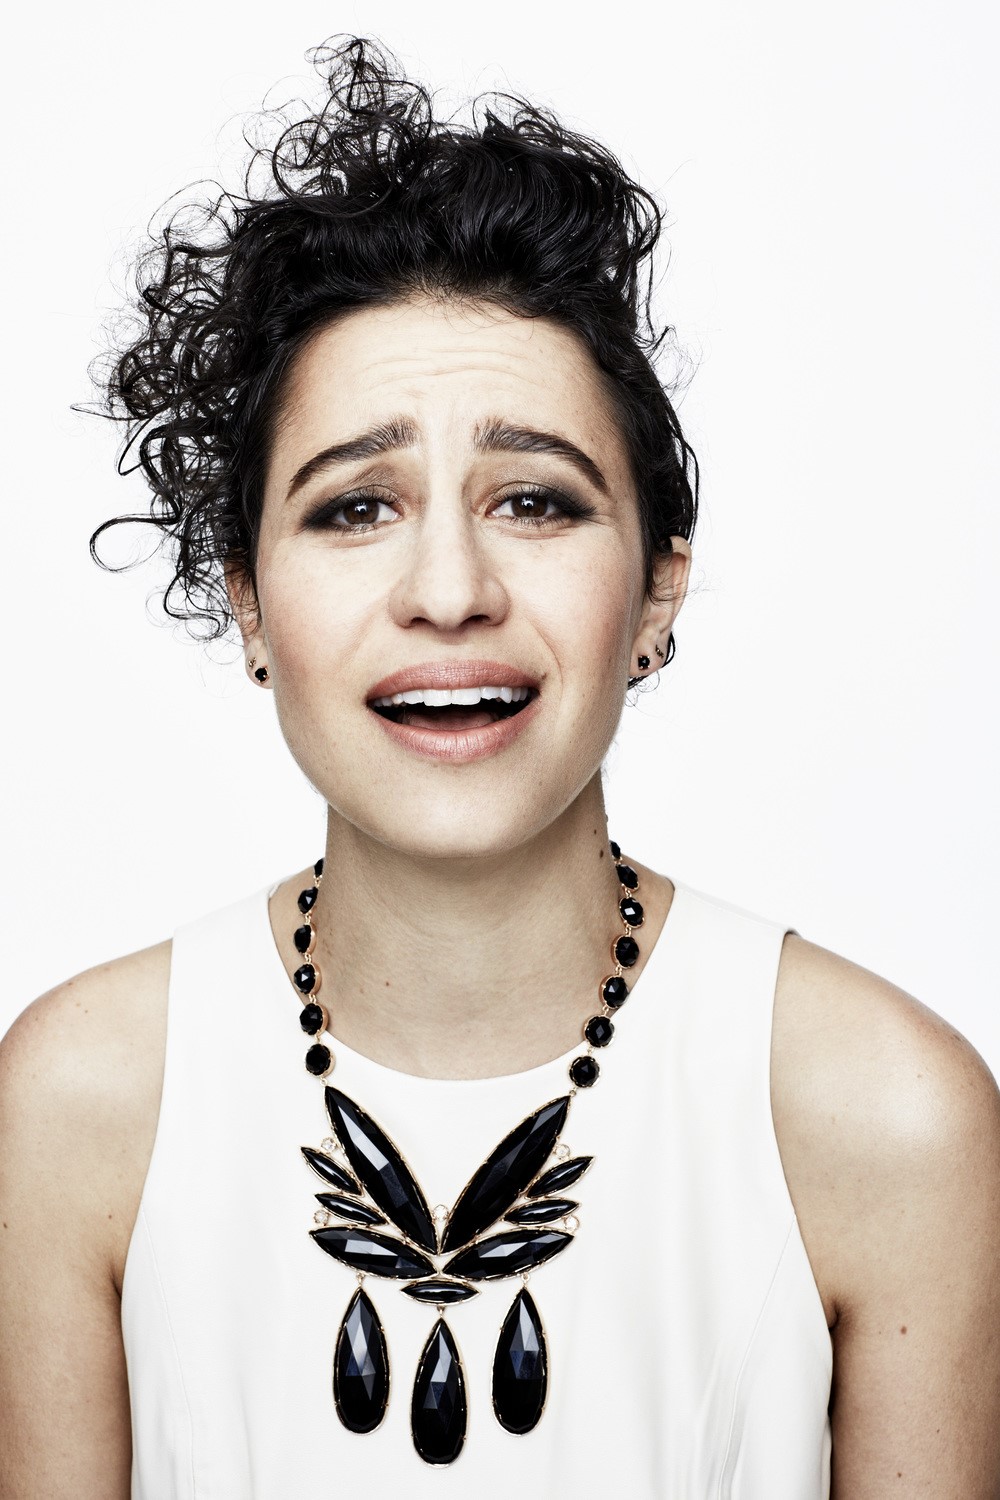 Ilana Glazer, Sure You Don’t want to be Sexually Harassed?